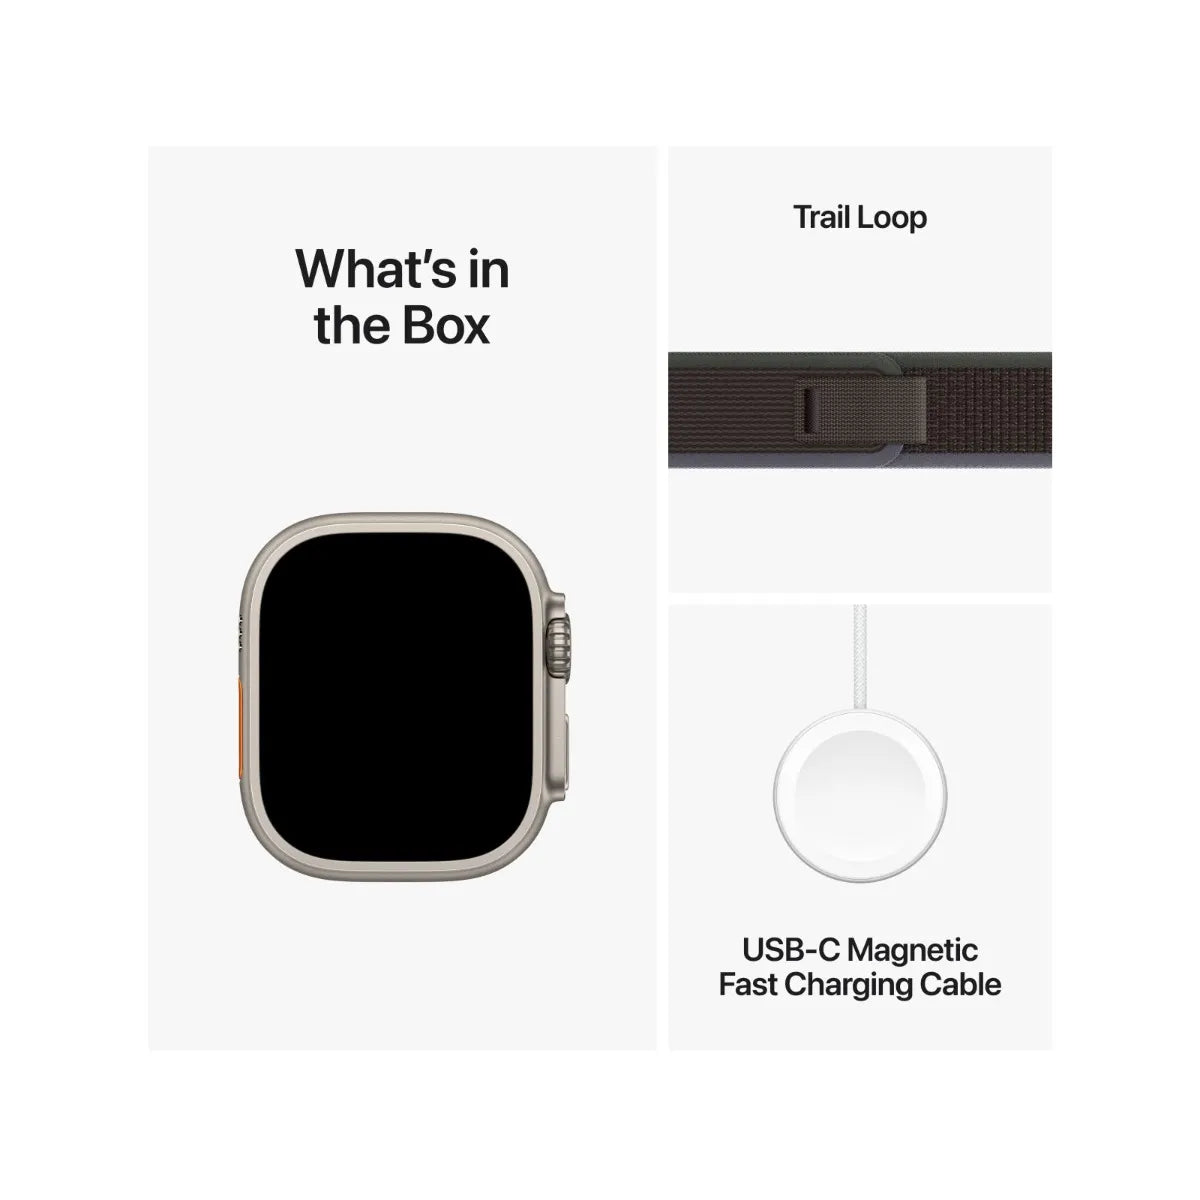 Apple Watch Ultra 2 (49mm, Titanium Case with Blue/Black Trail Loop, GPS + Cell) - New , Open Box / Apple Limited Warranty - Mac Shack